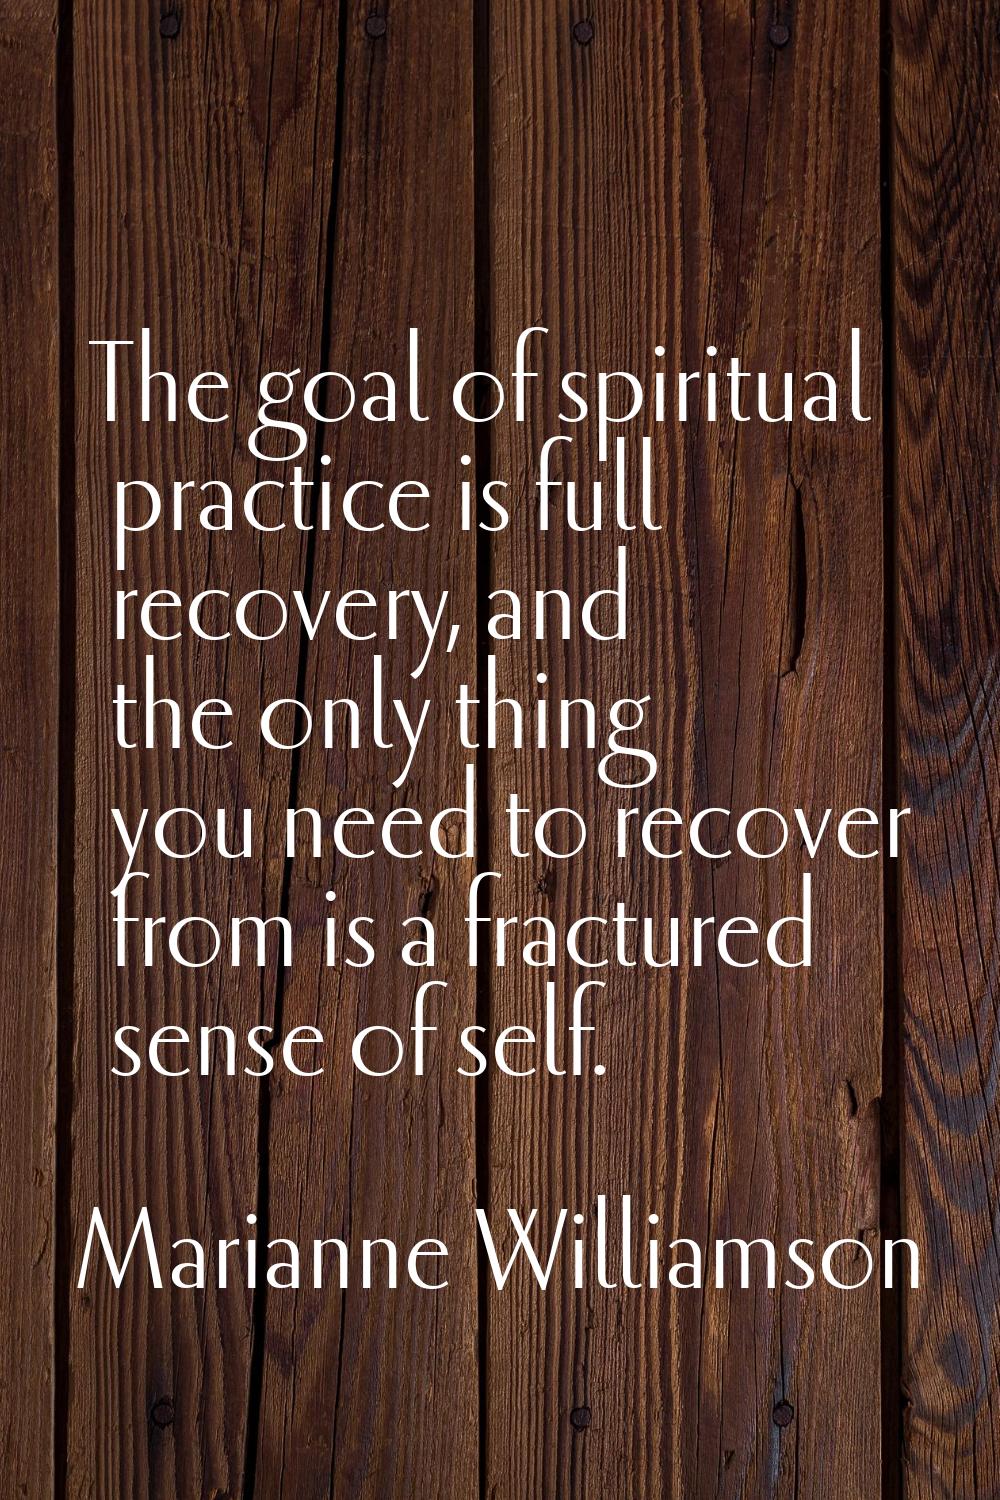 The goal of spiritual practice is full recovery, and the only thing you need to recover from is a f